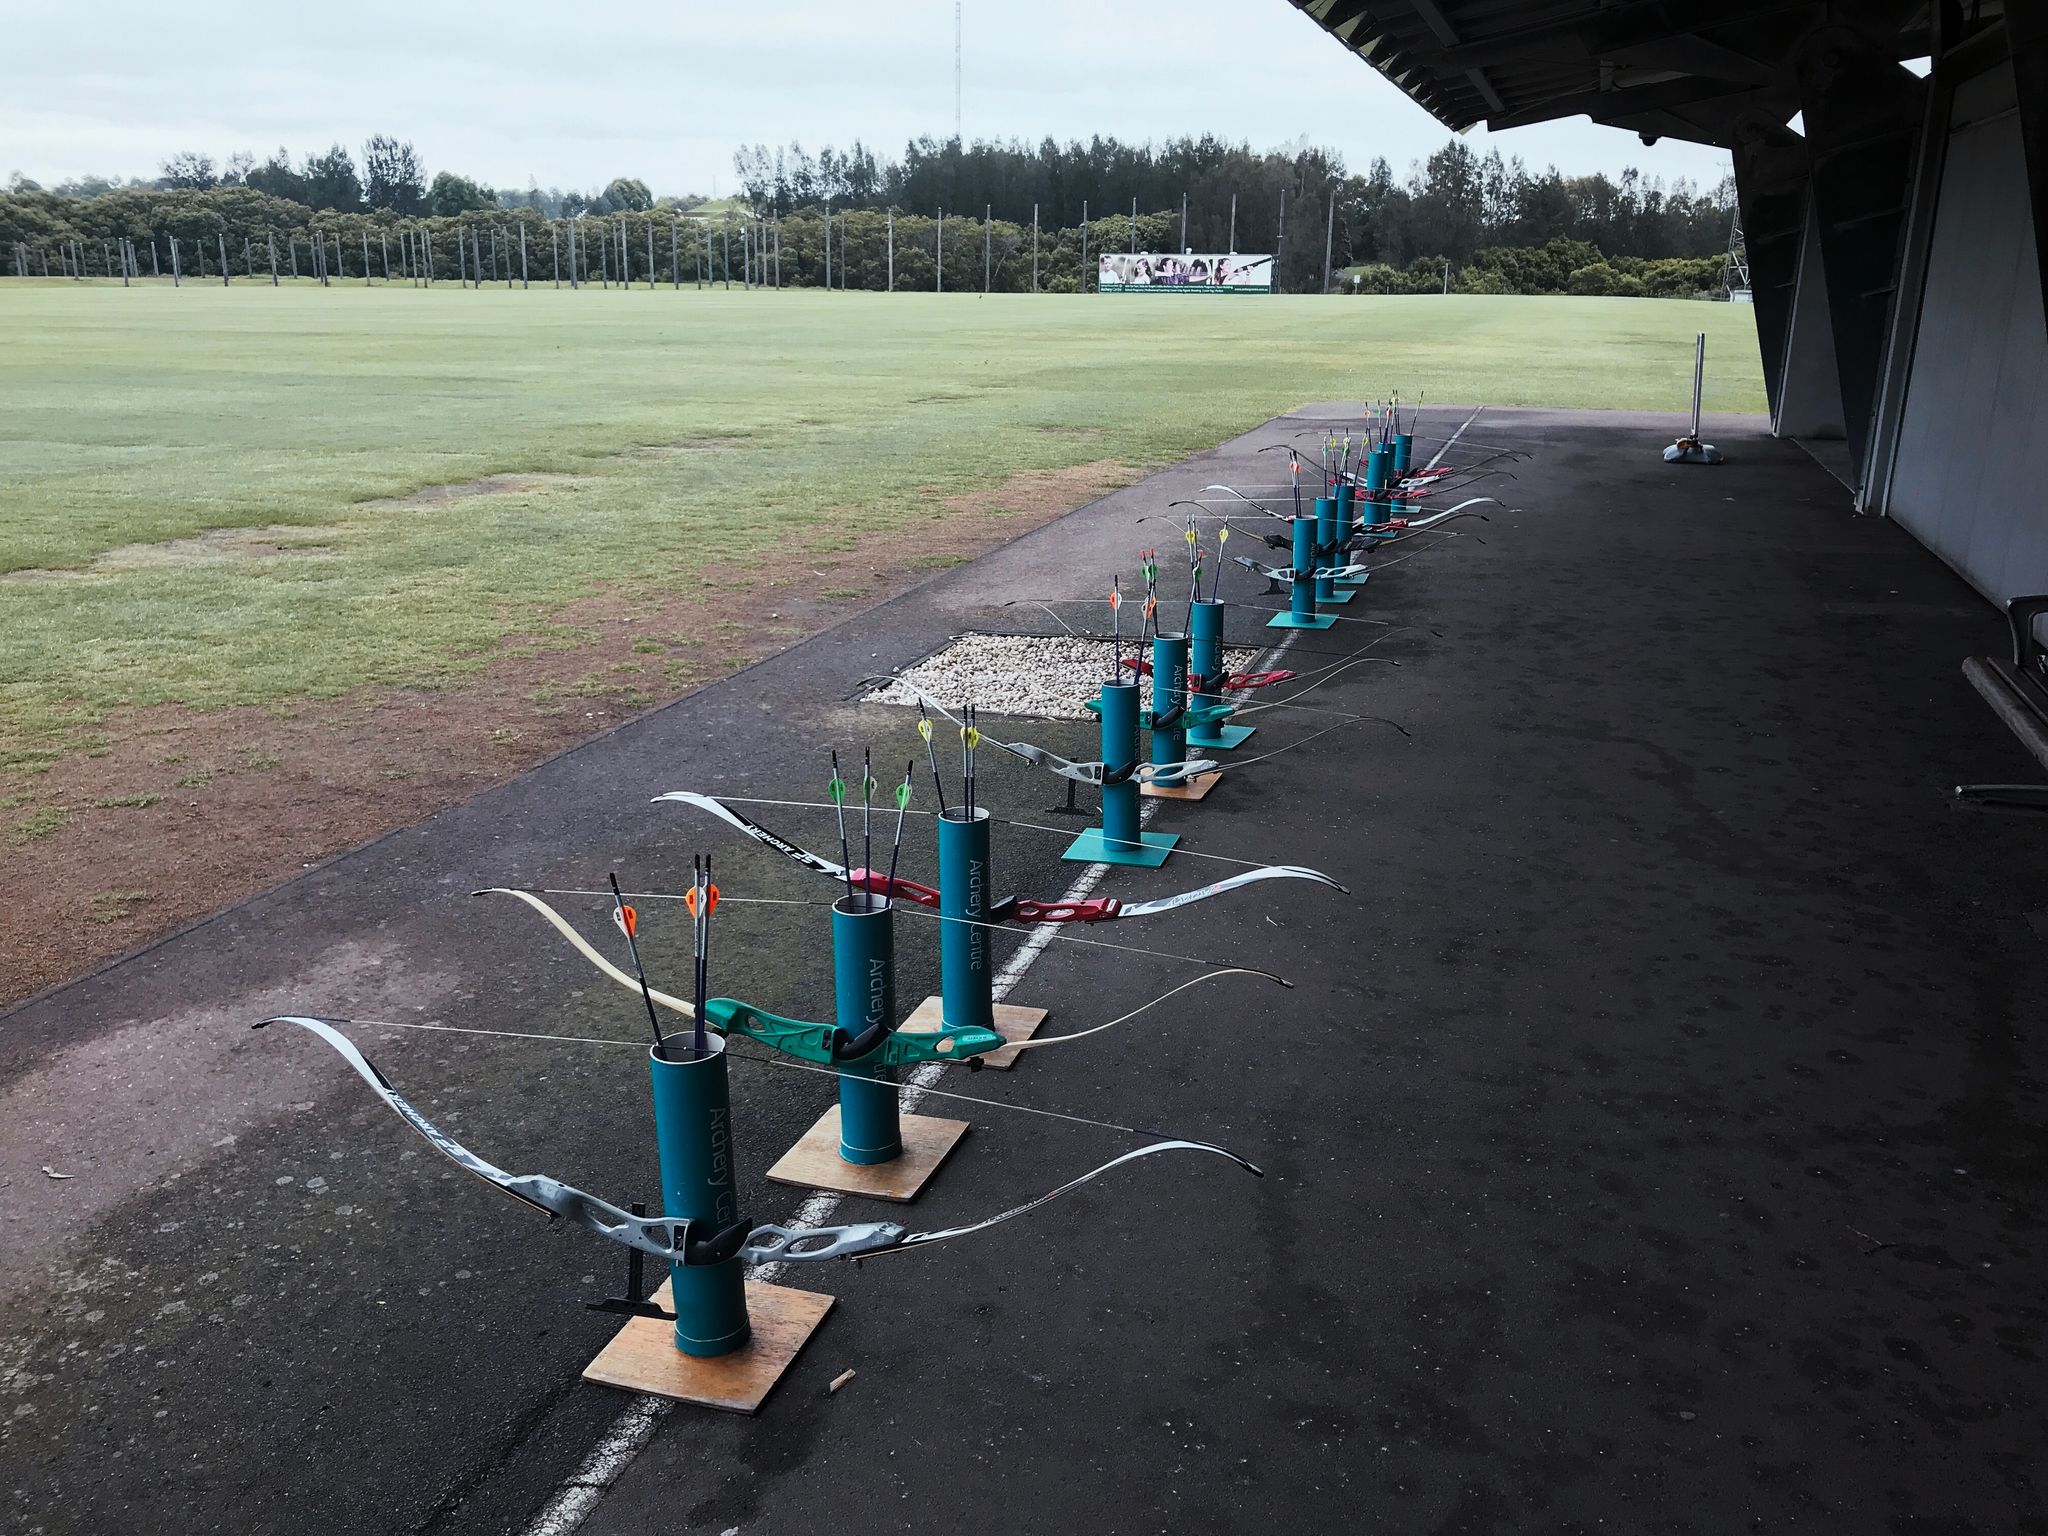 A row of bows and arrows lined up, ready to use.